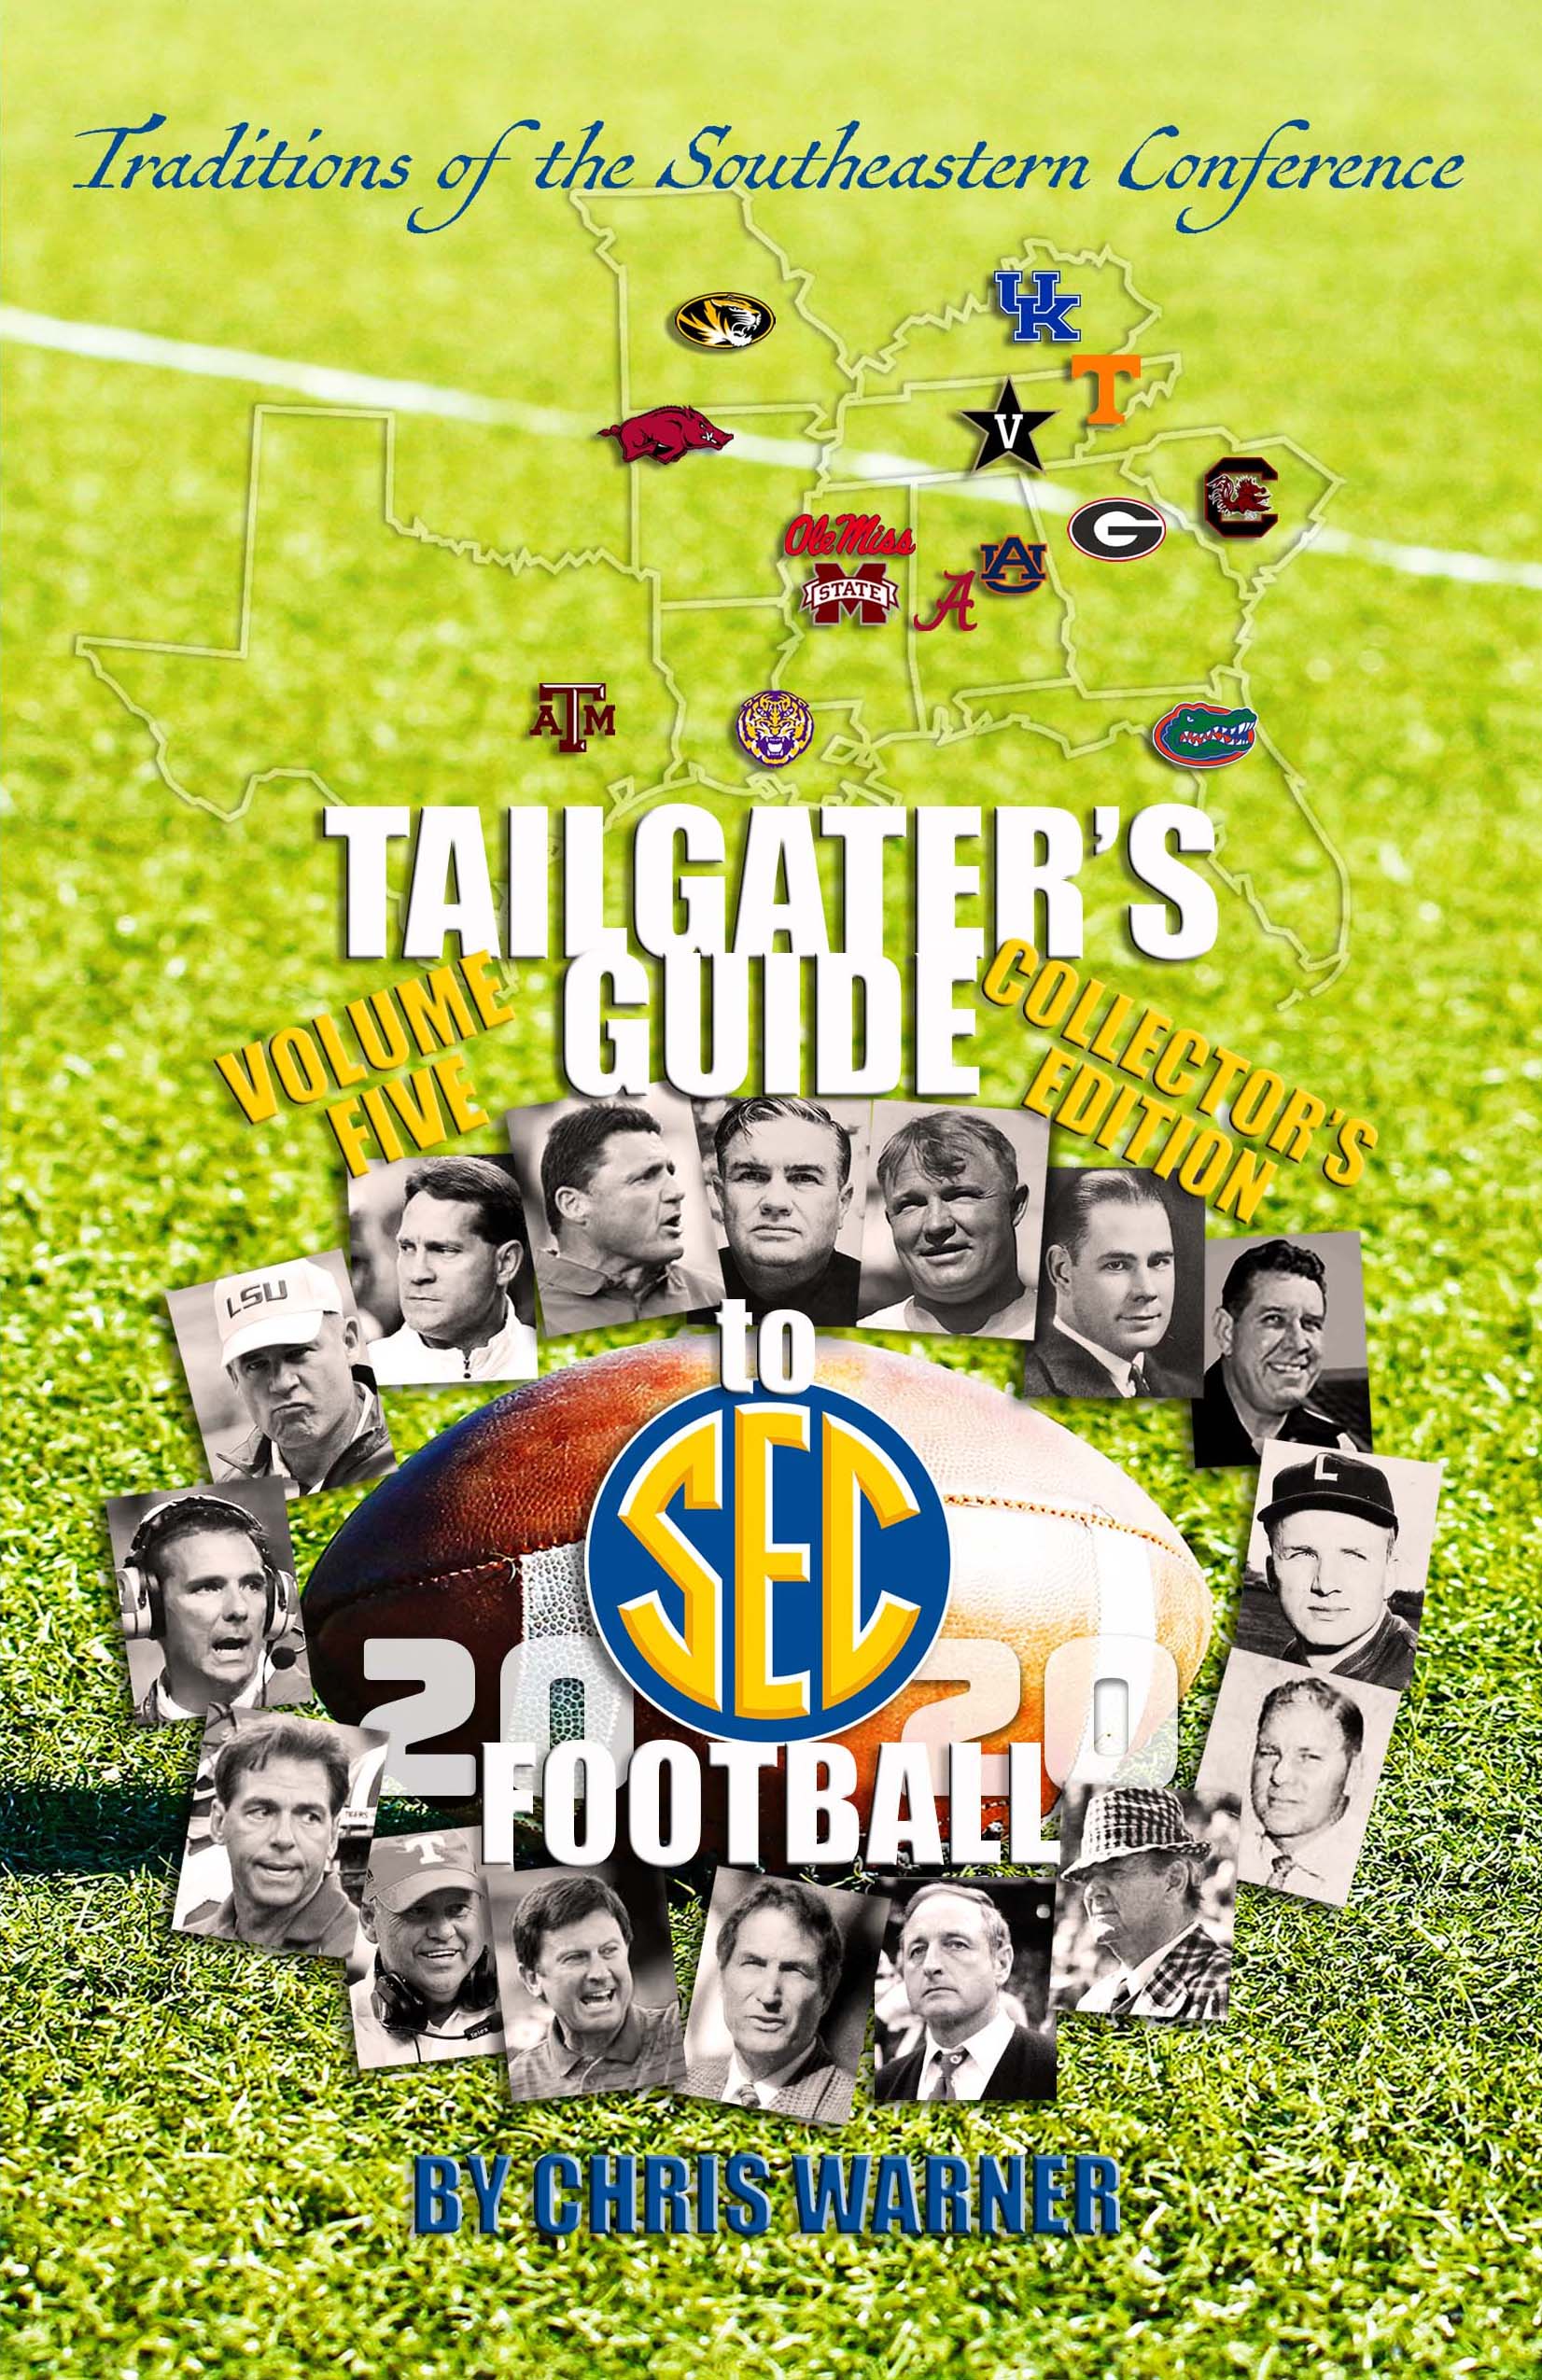 Warner Releases Fifth Version of His Best-Selling Book: Tailgaters' Guide to SEC Football" 2020